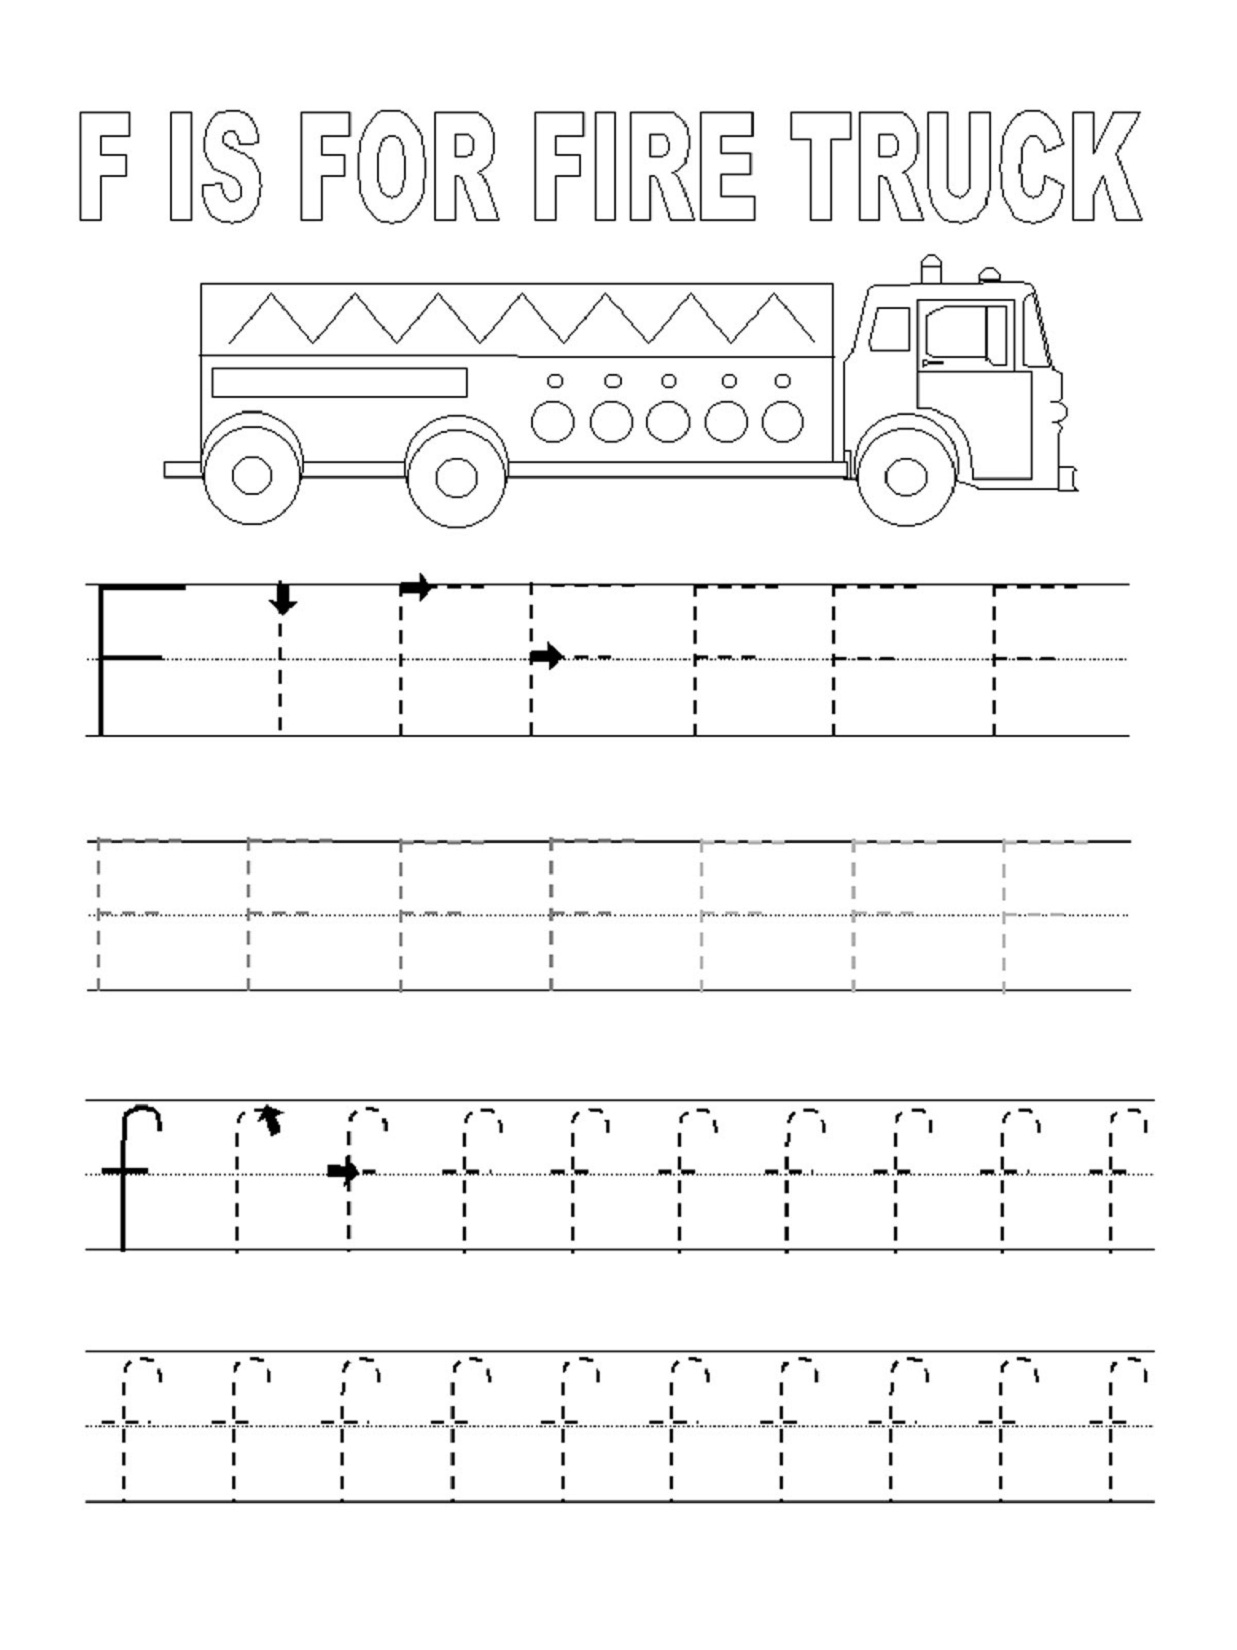 Traceable Letter Worksheets To Print | Activity Shelter